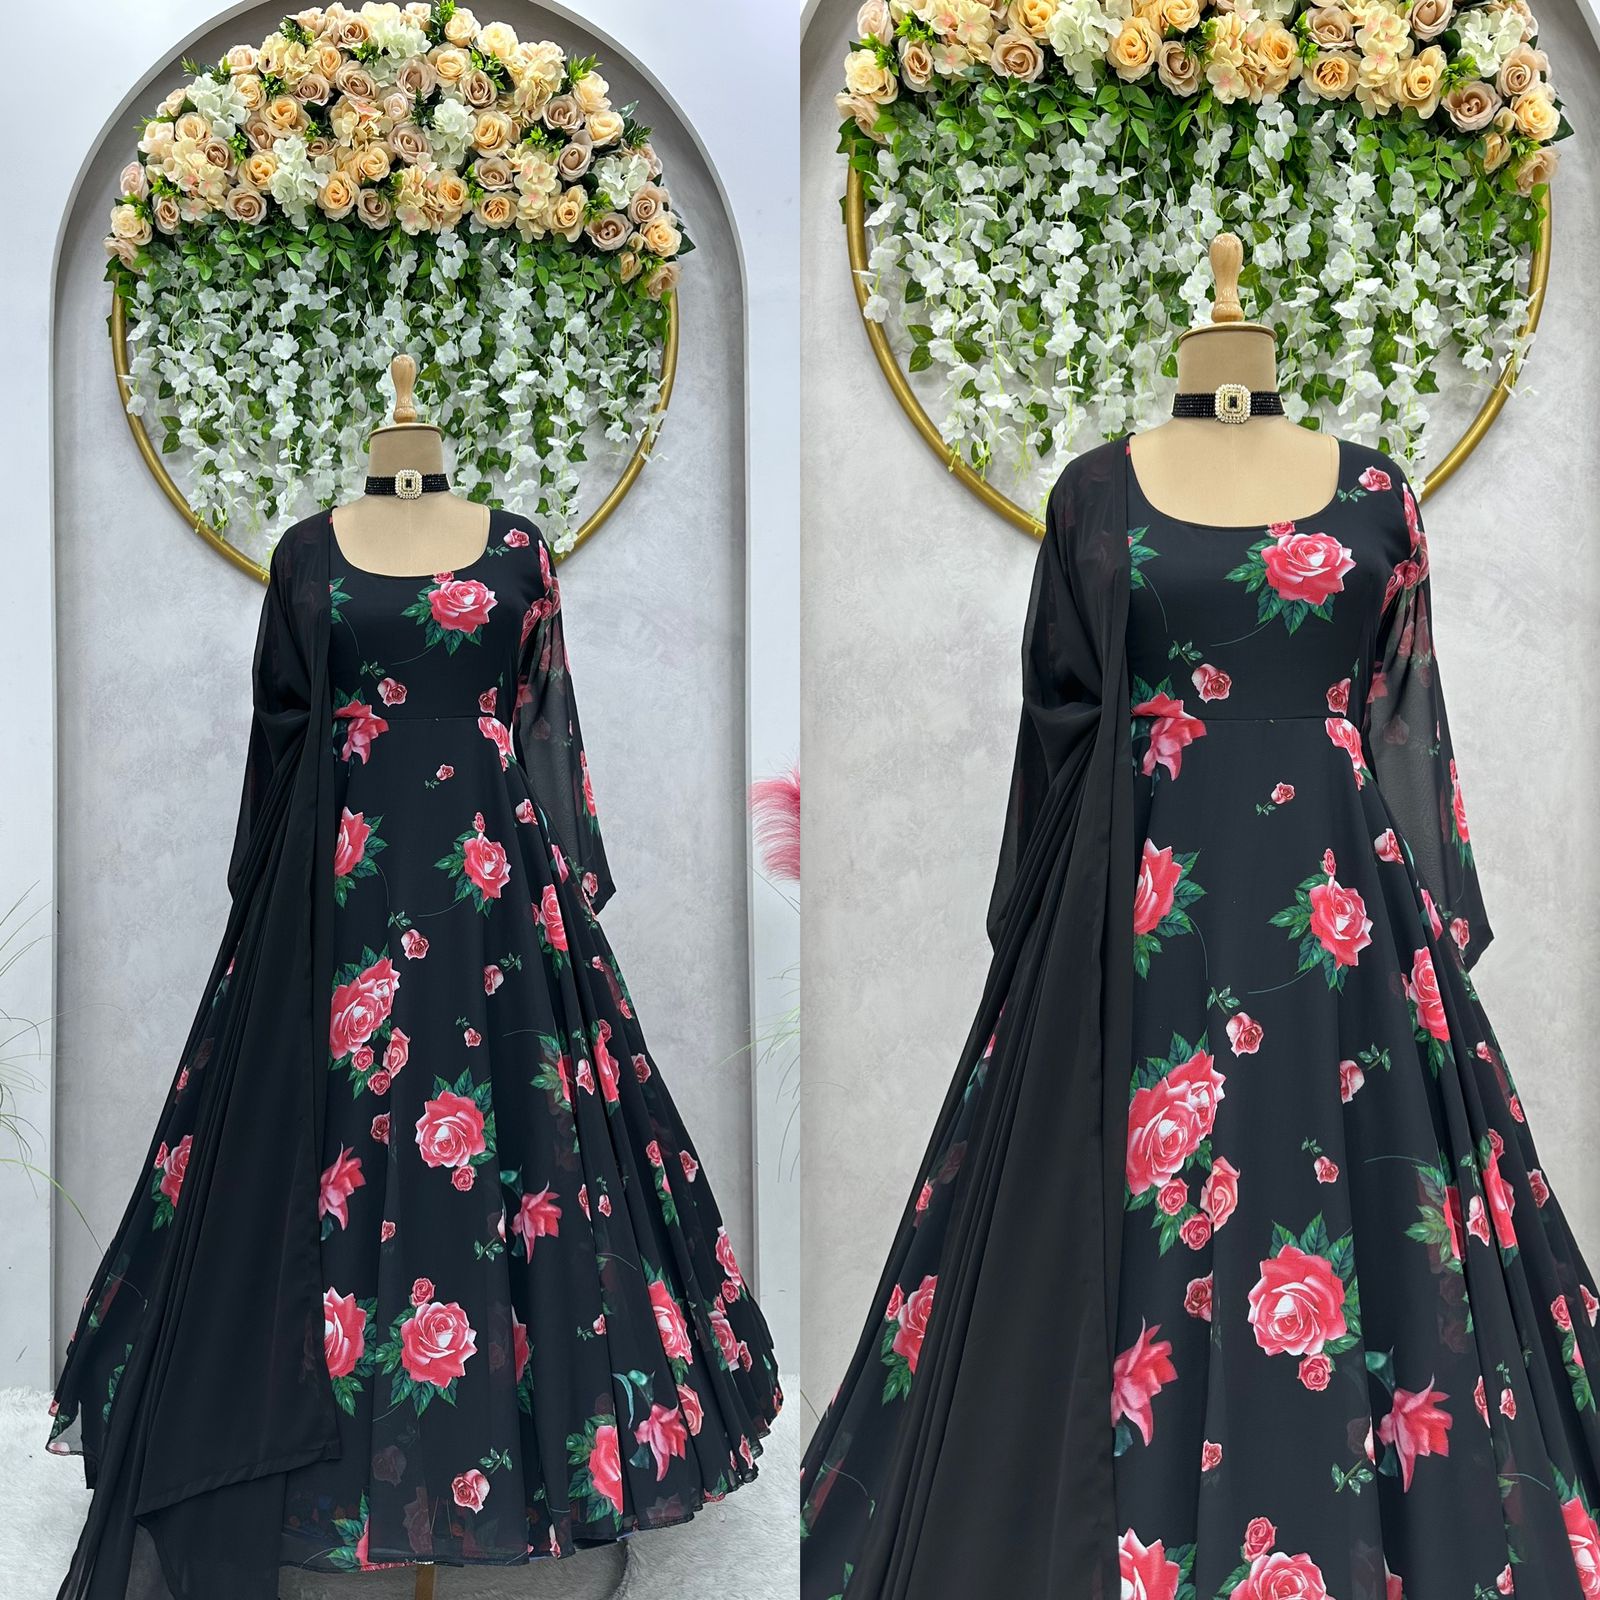 Black Floral Printed Readymade Gown In Cotton 258GW02